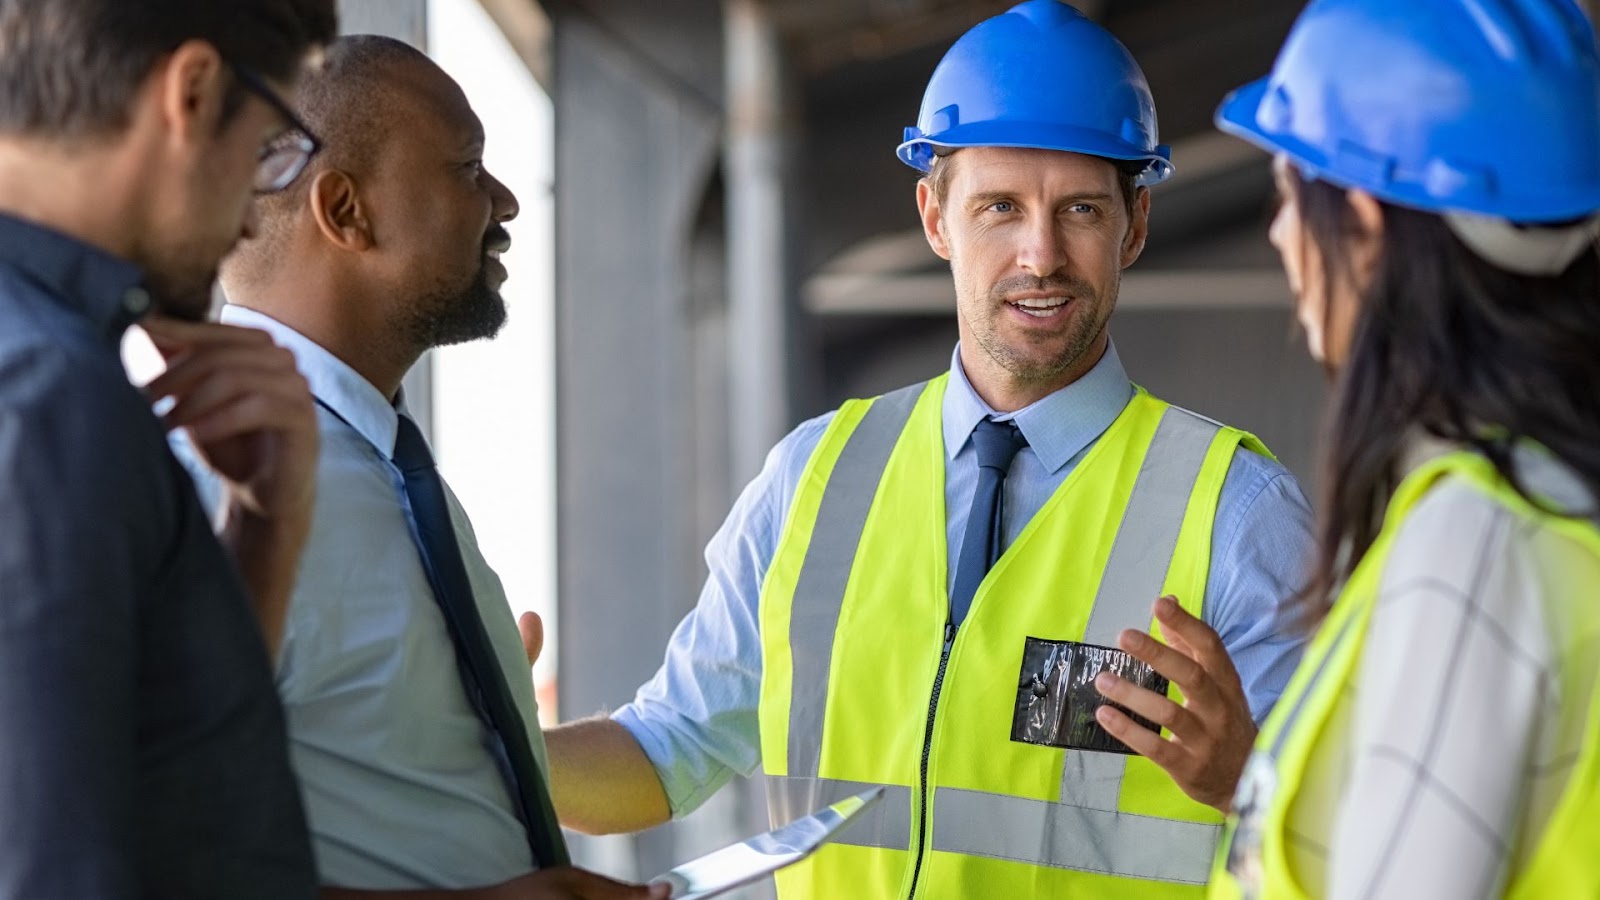 6 Conversations Between Quantity Surveyors You Need To Know.